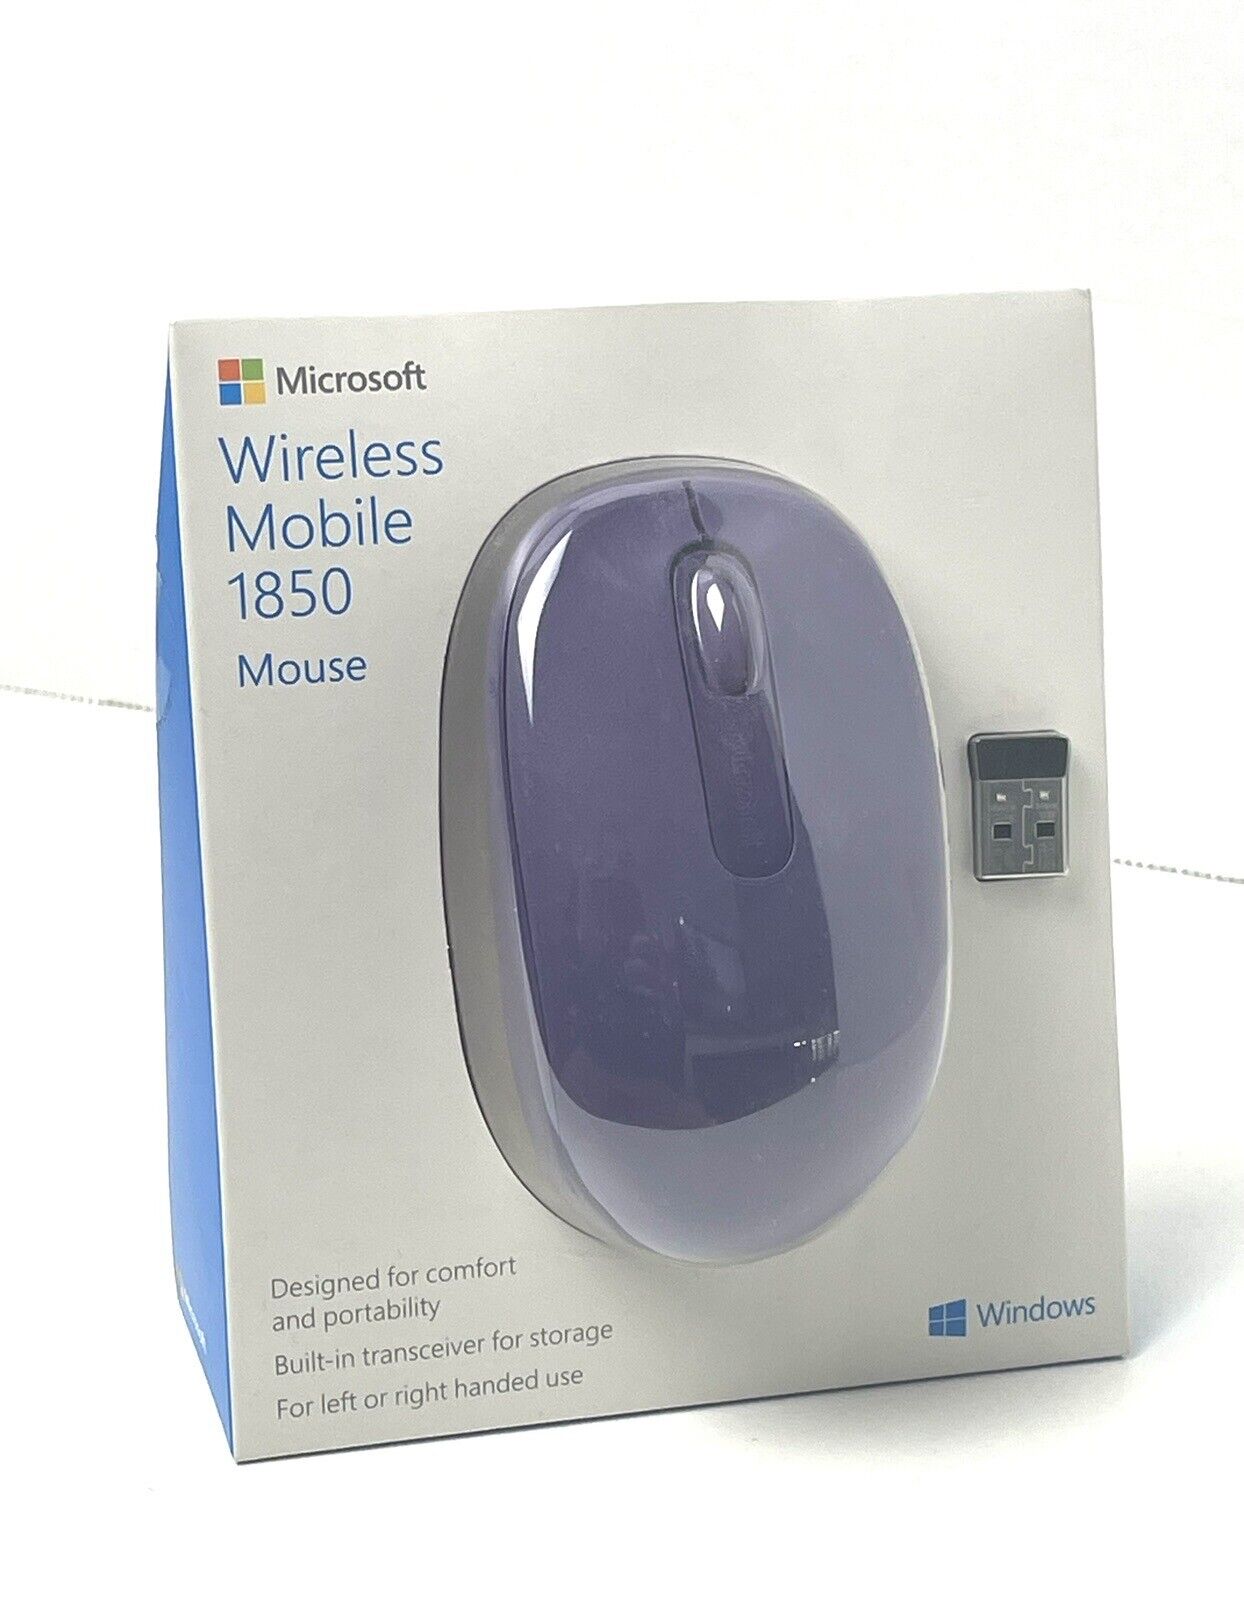 Microsoft Wireless Mobile Mouse 1850 Purple Wireless Connectivity USB Dongle NEW